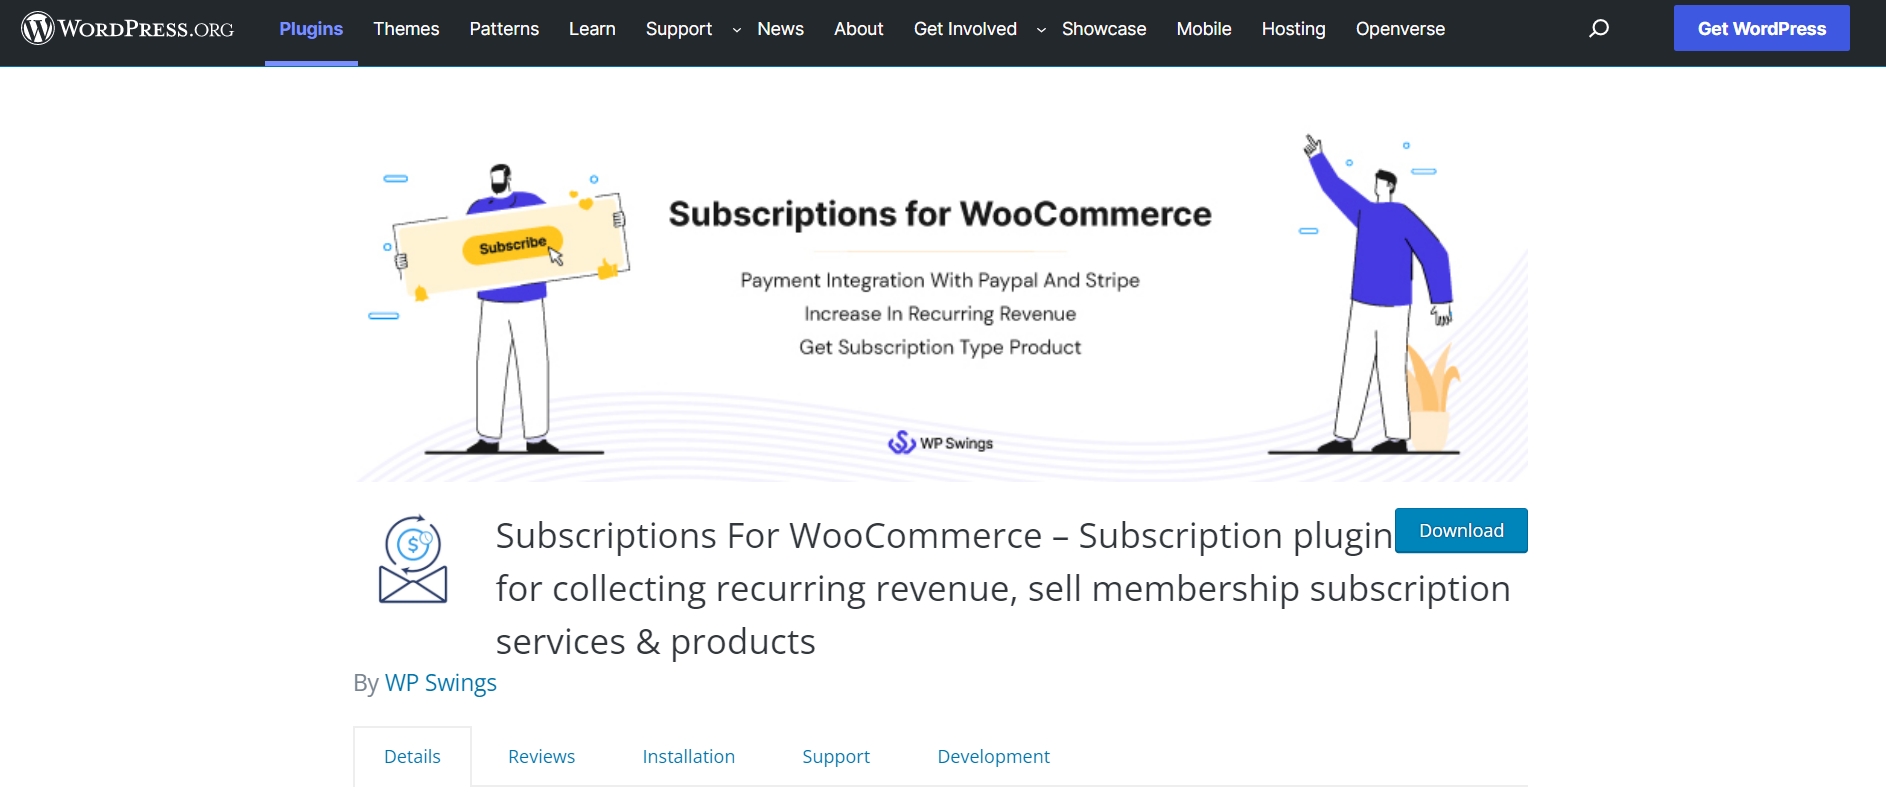 Subscription For WooCommerce